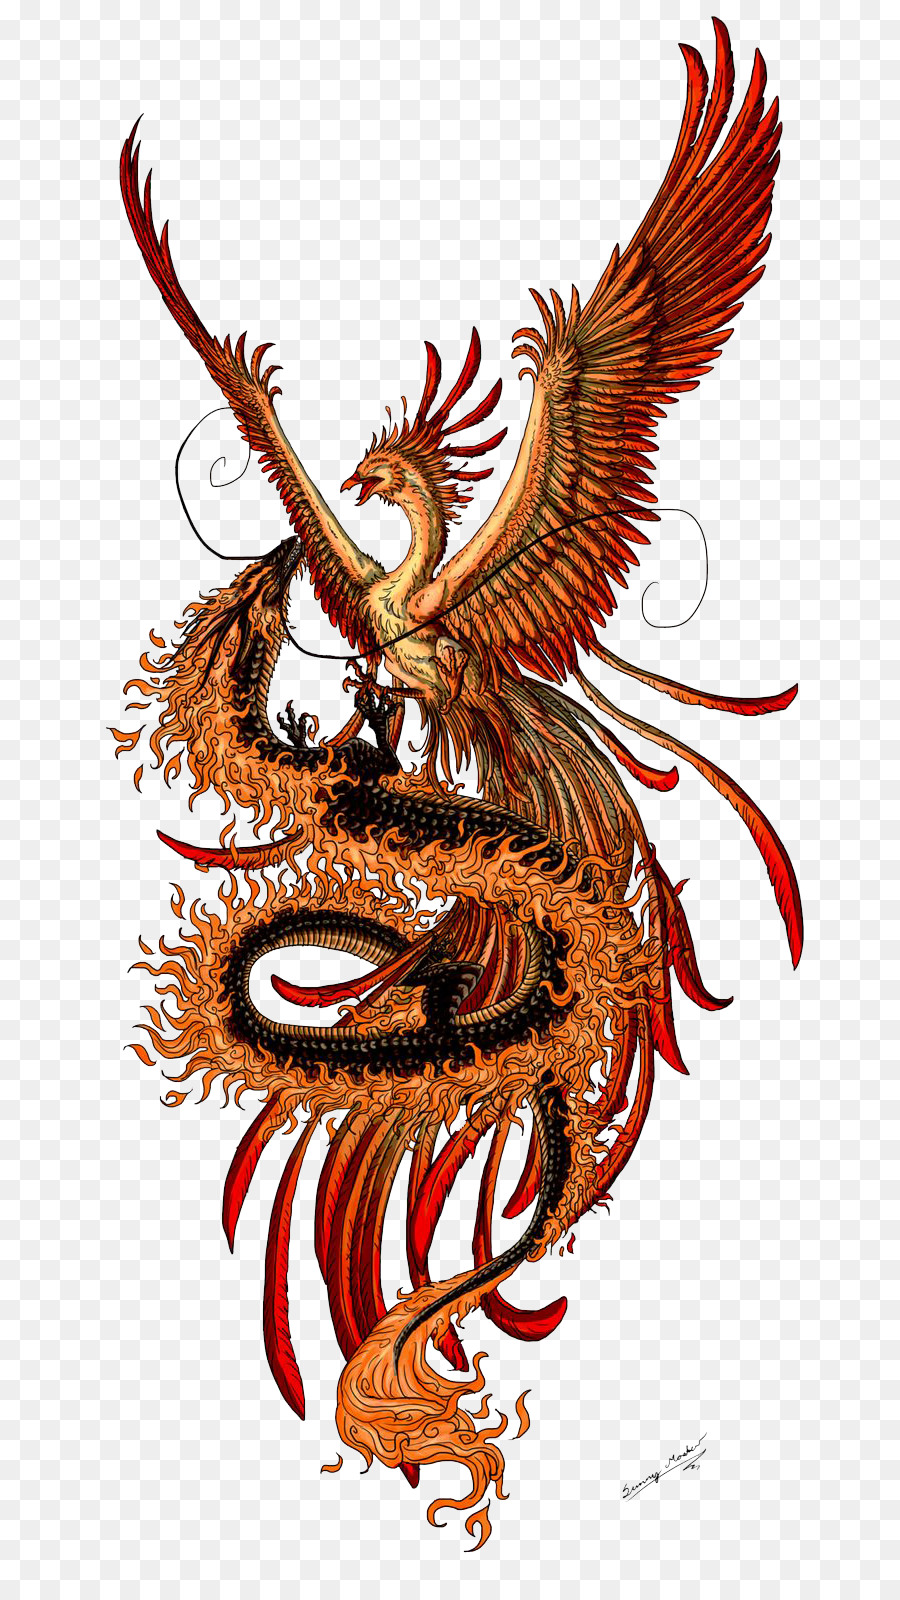 Phoenix Chinese dragon Fenghuang Tattoo - Phoenix Tattoos PNG Transparent Images png download - 736*1588 - Free Transparent Phoenix png Download.